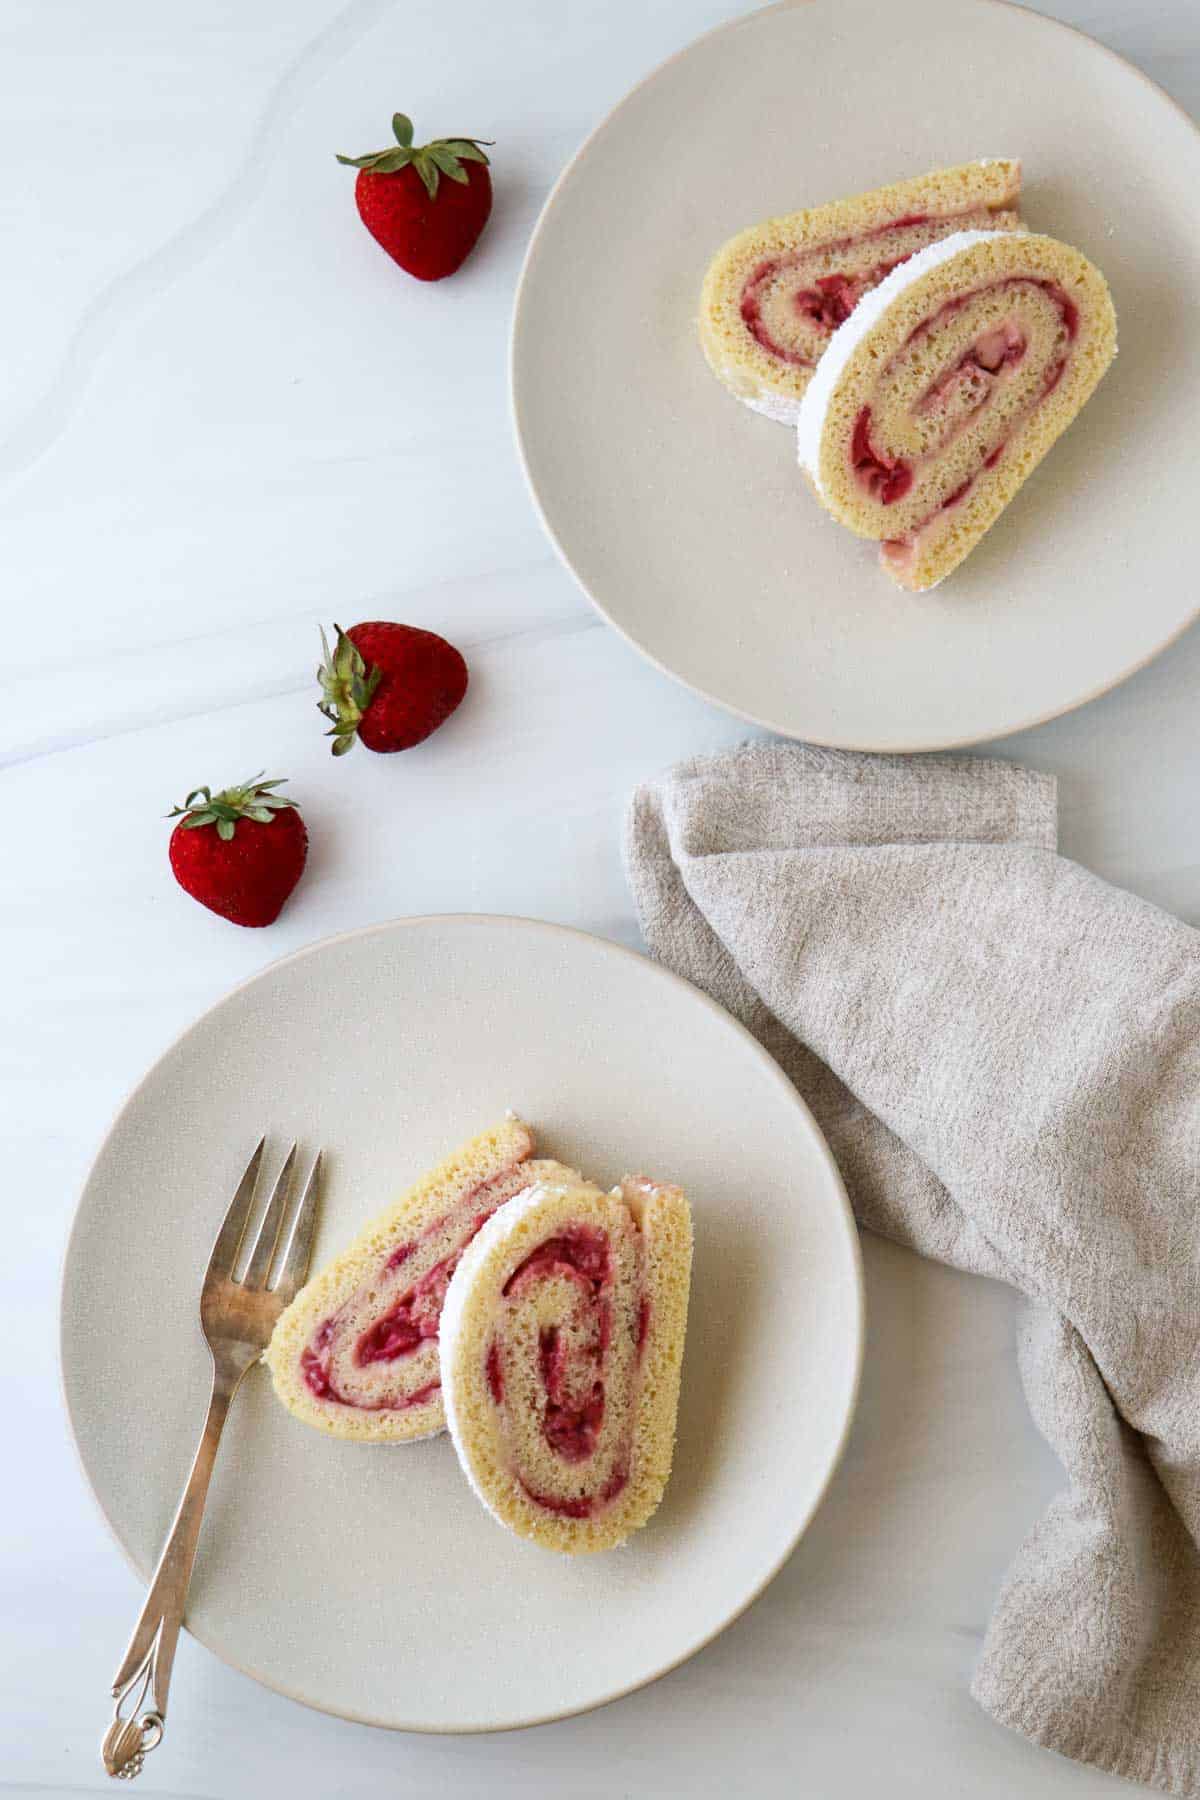 Overhead view of two plates of Strawberry Roll Cake slices.